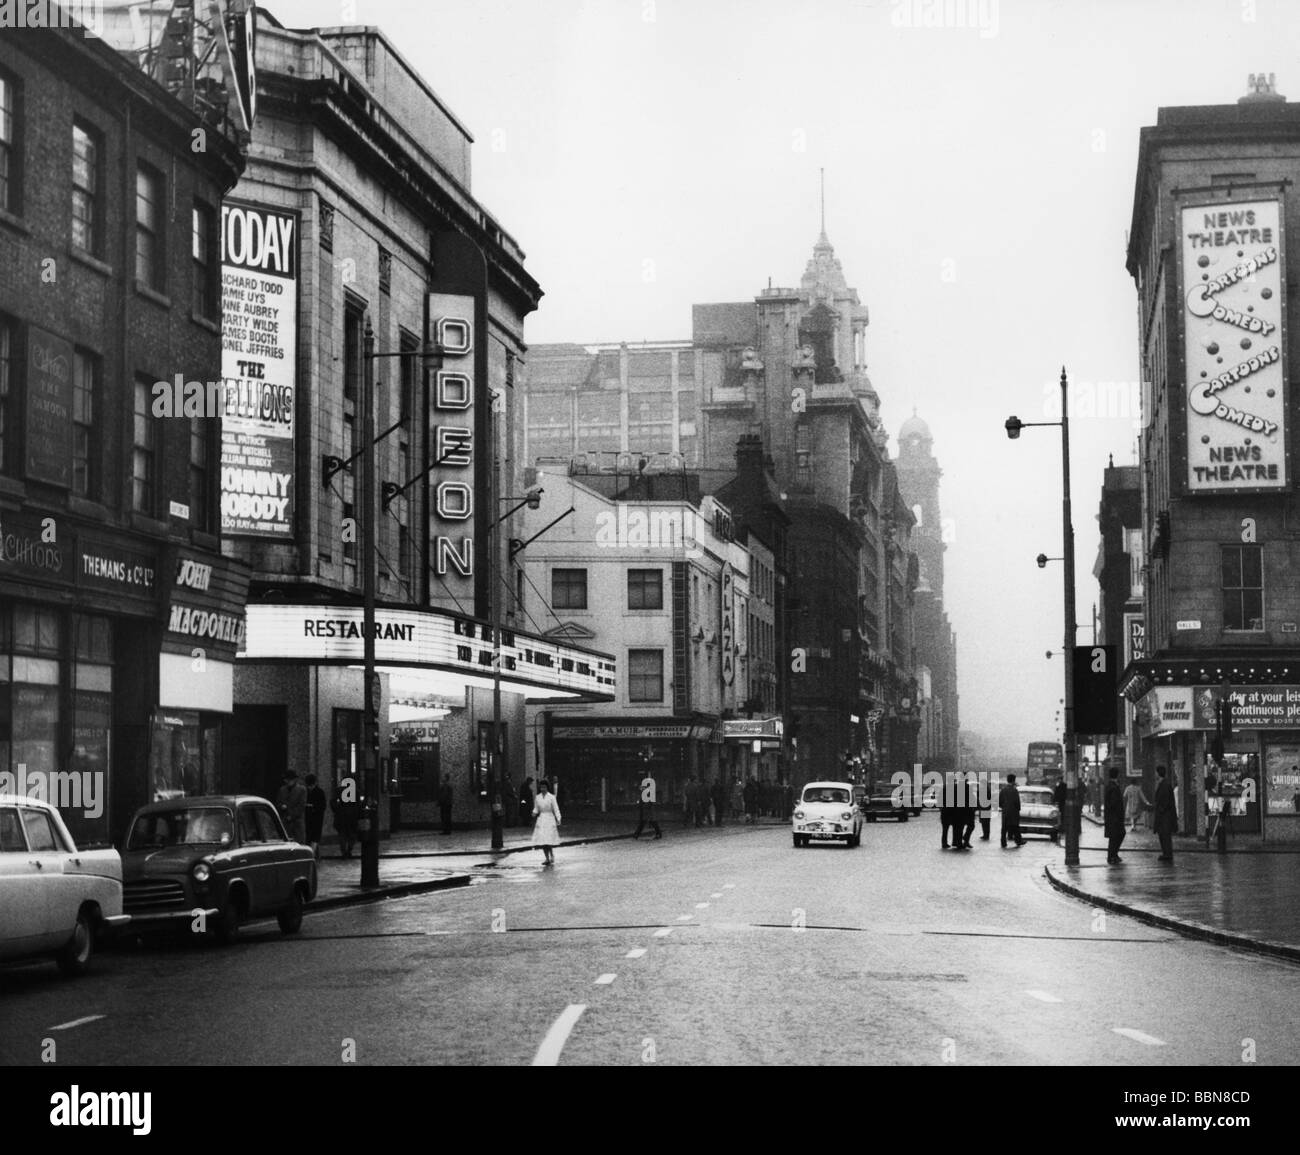 geography / travel, Great Britain, Manchester, streets, Oxford Street, Odeon and News Theatre, 1960s, Stock Photo